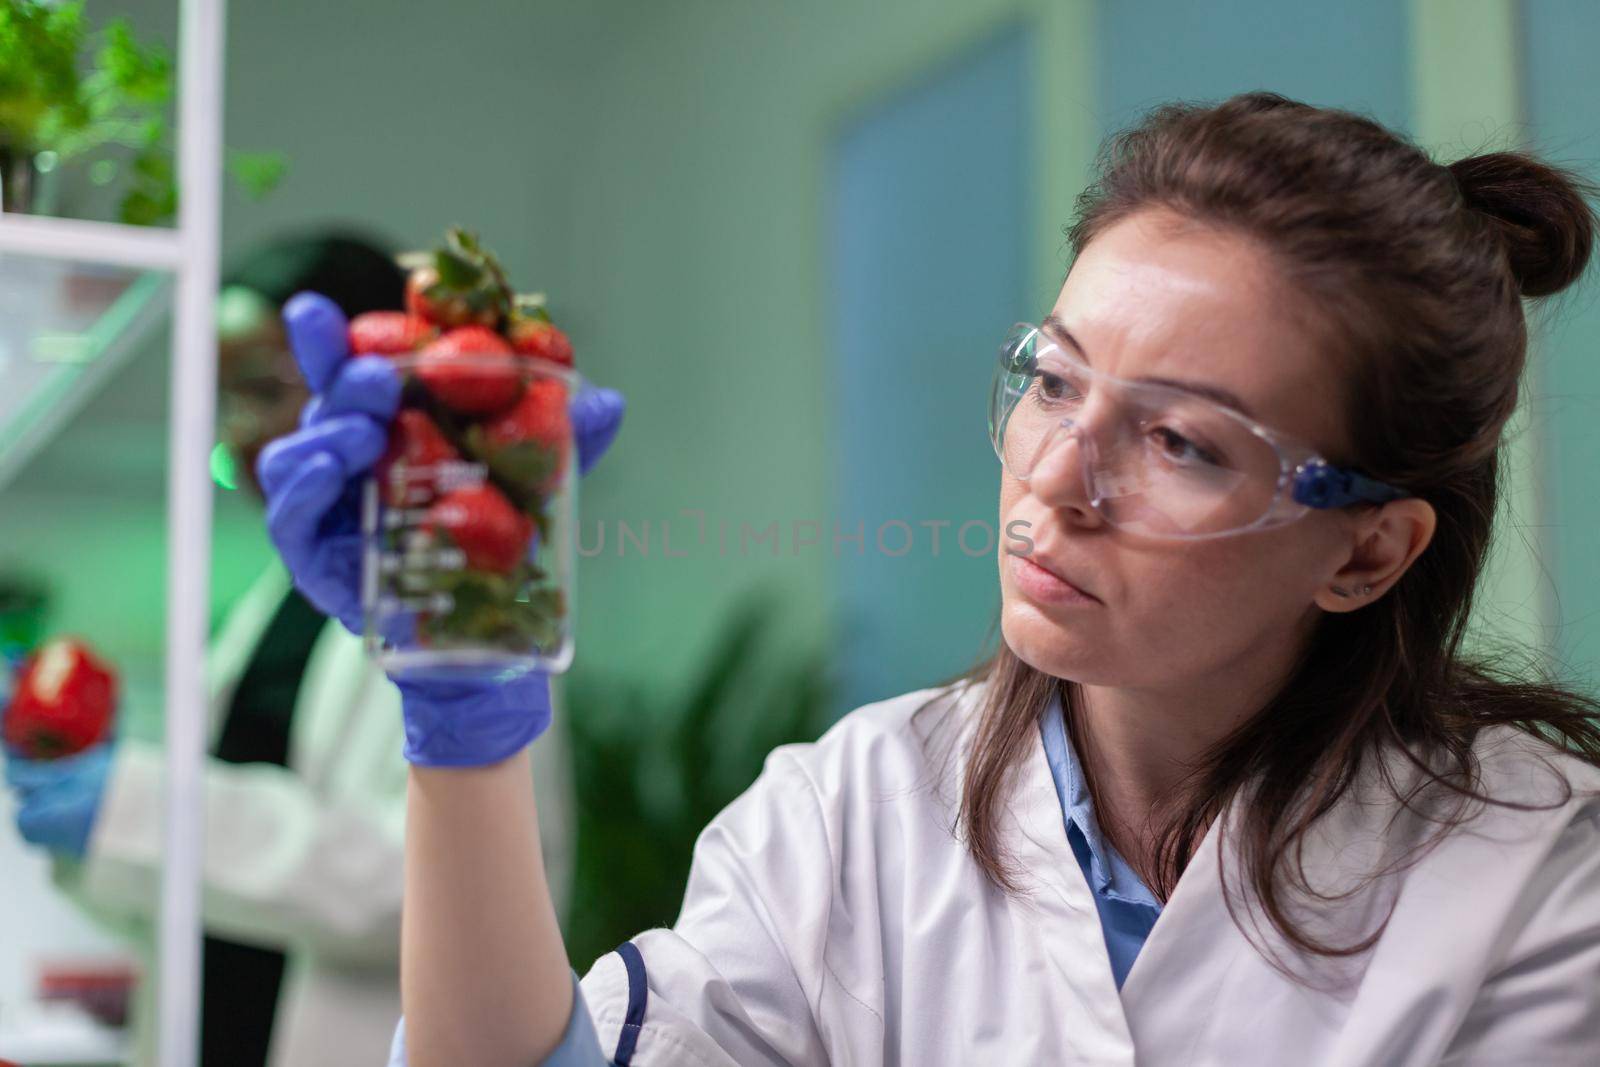 Researcher holding glas with strawberry injected with pesticides discovering genetic mutation on computer after medical expertise. Medical team working researcing gmo fruits in farming lab.